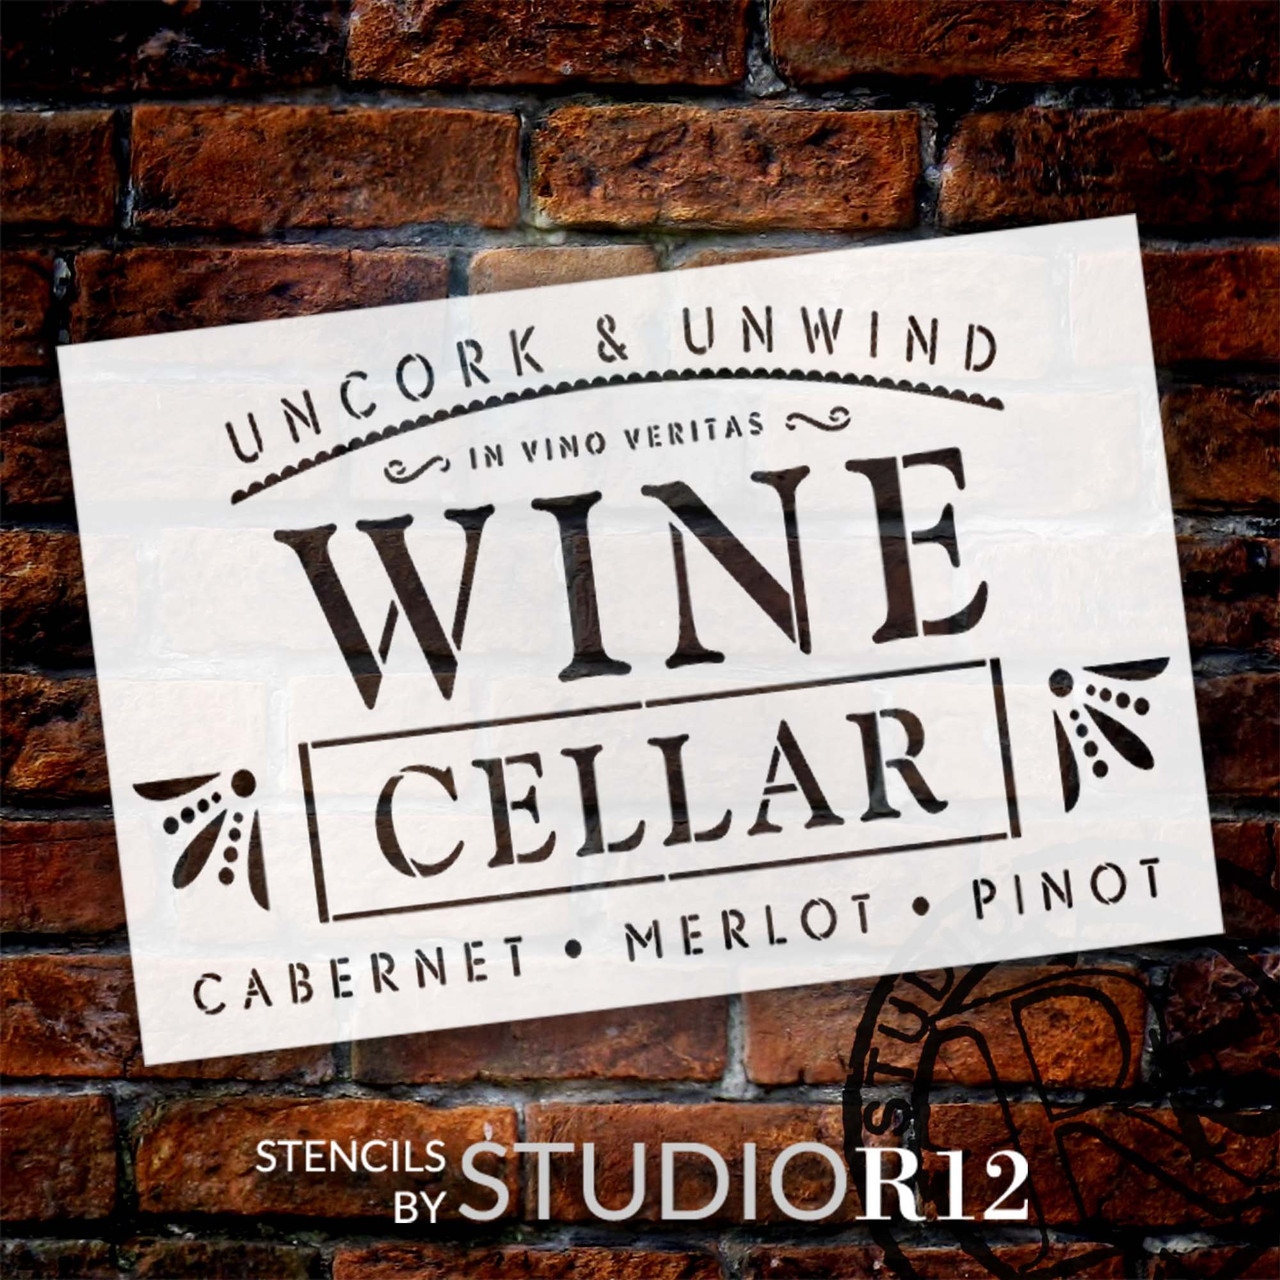 Uncork and Unwind Wine Cellar Stencil by StudioR12 | in Wine There is Truth Latin Phrase | Craft DIY Kitchen Decor | Paint Wood Bar Sign | Select Size